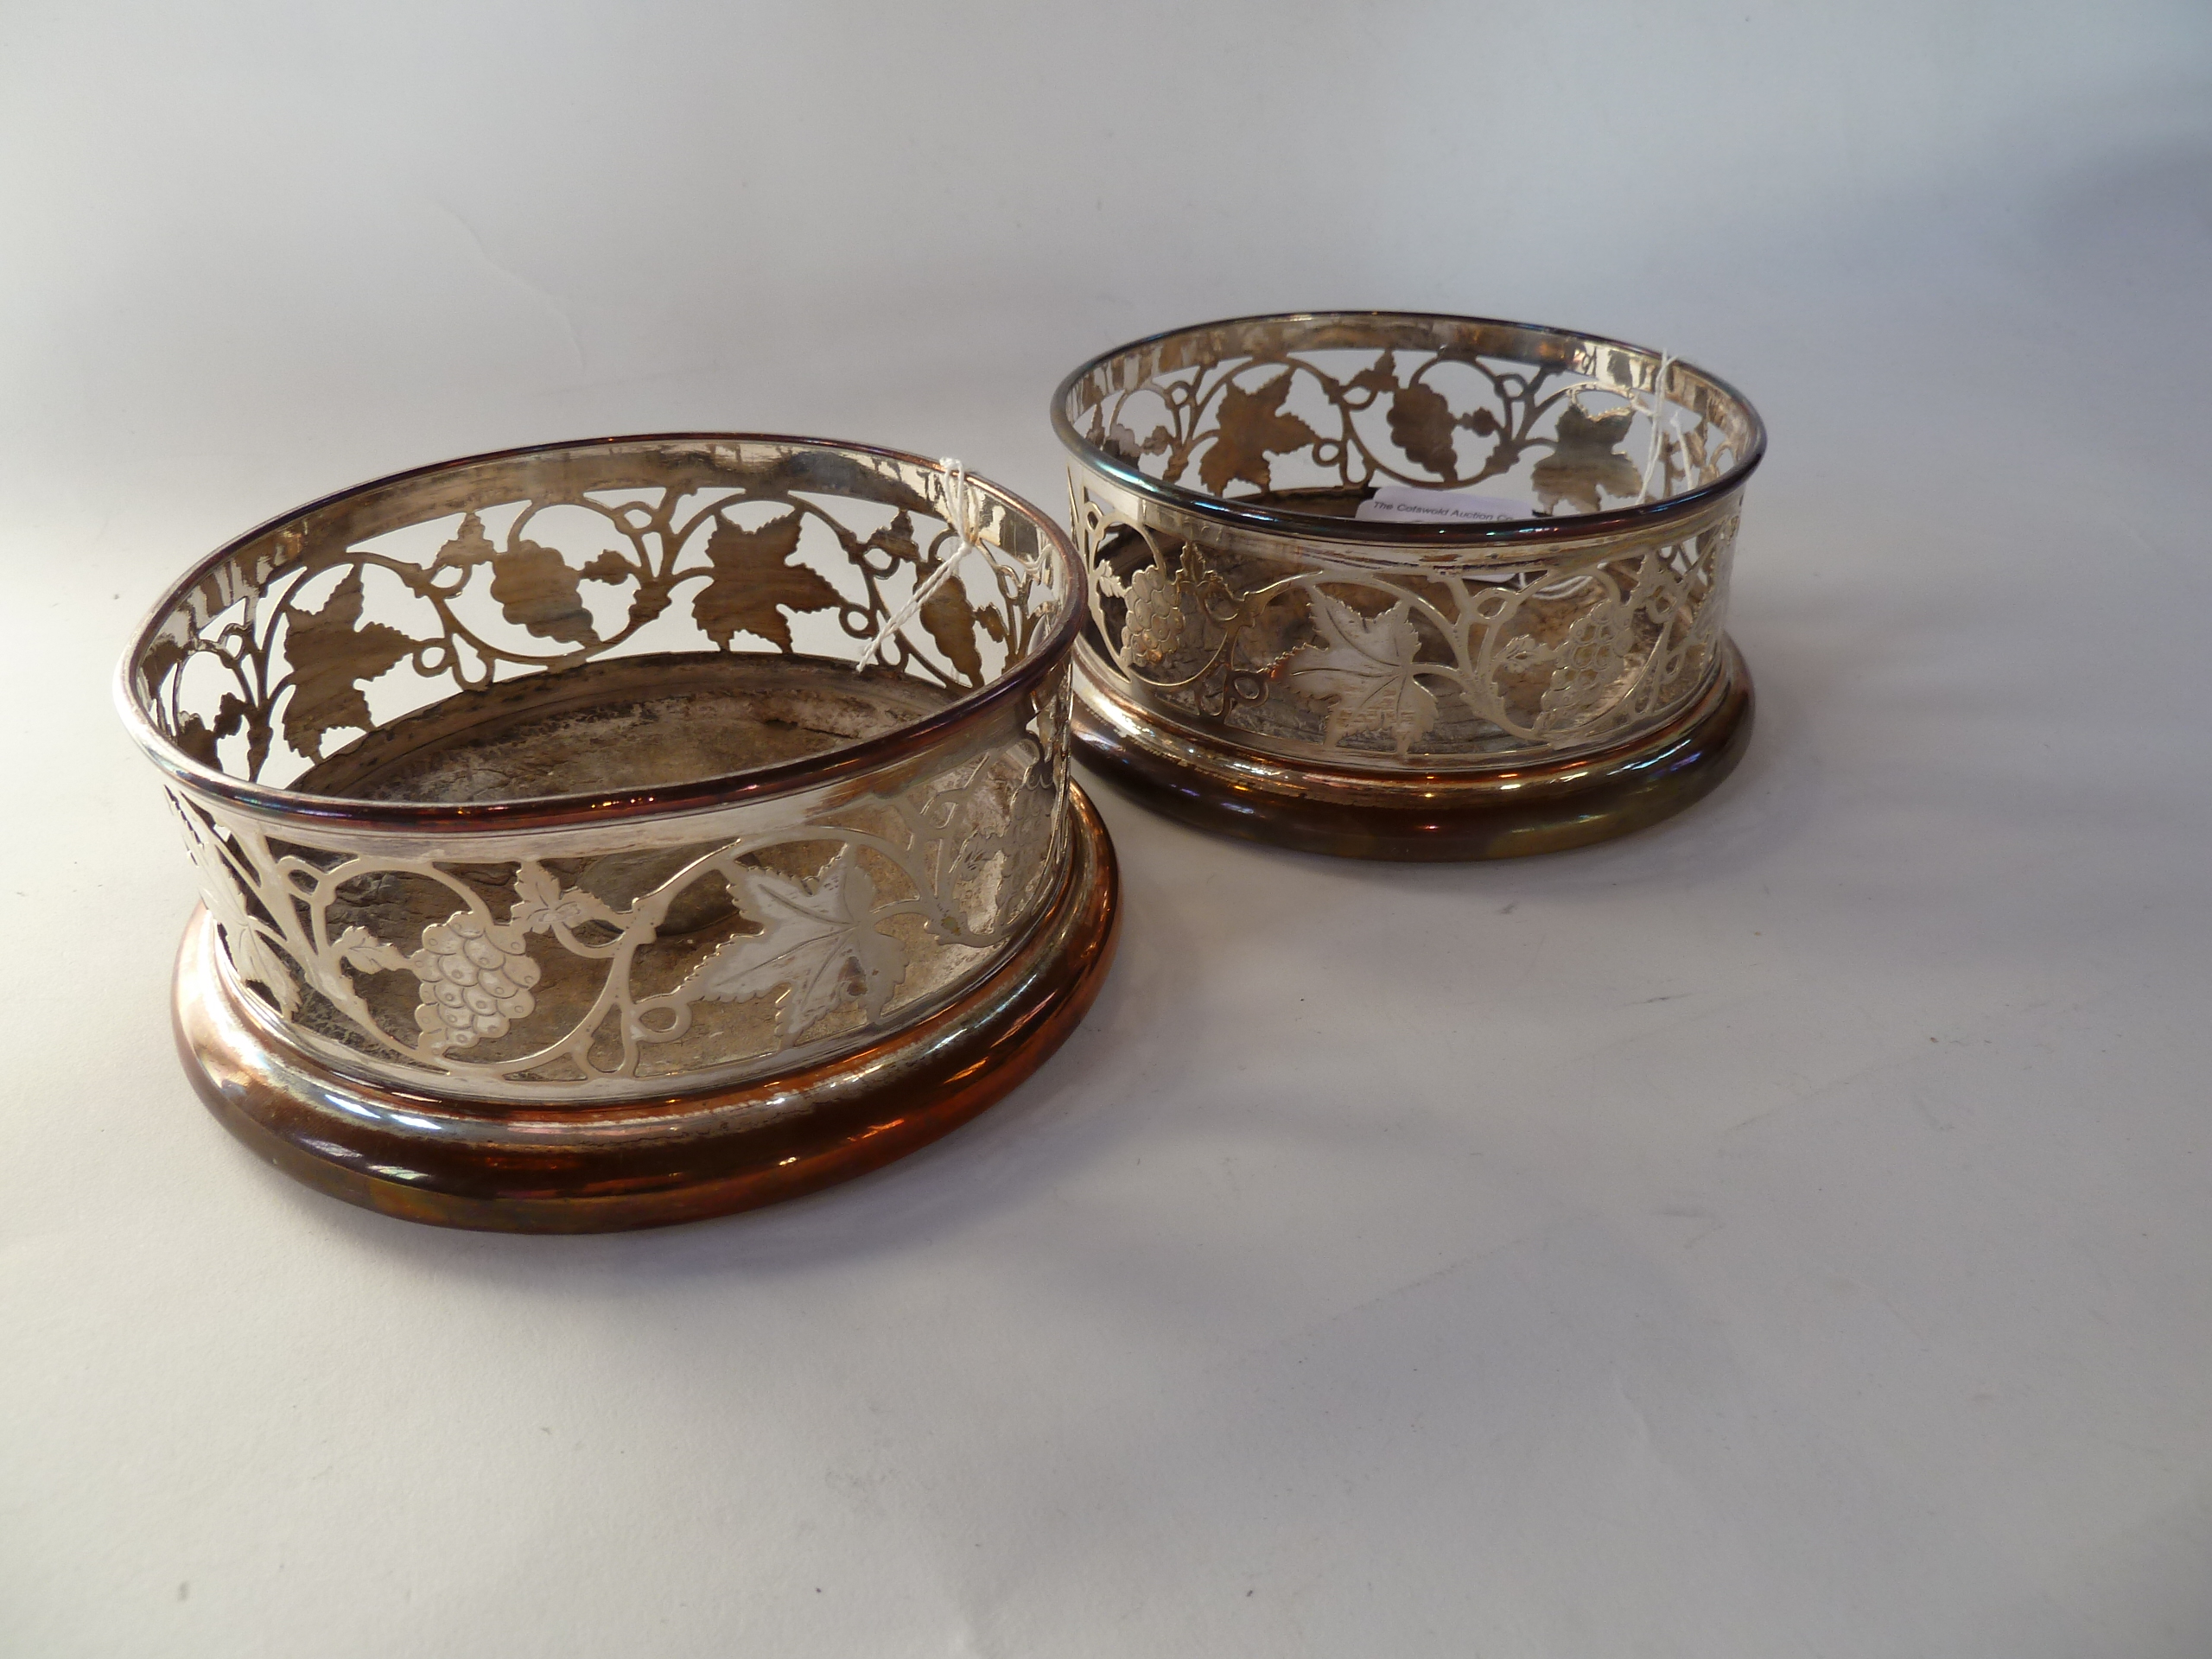 A pair silverplated coasters, with openwork vine and leaf design, wooden bases